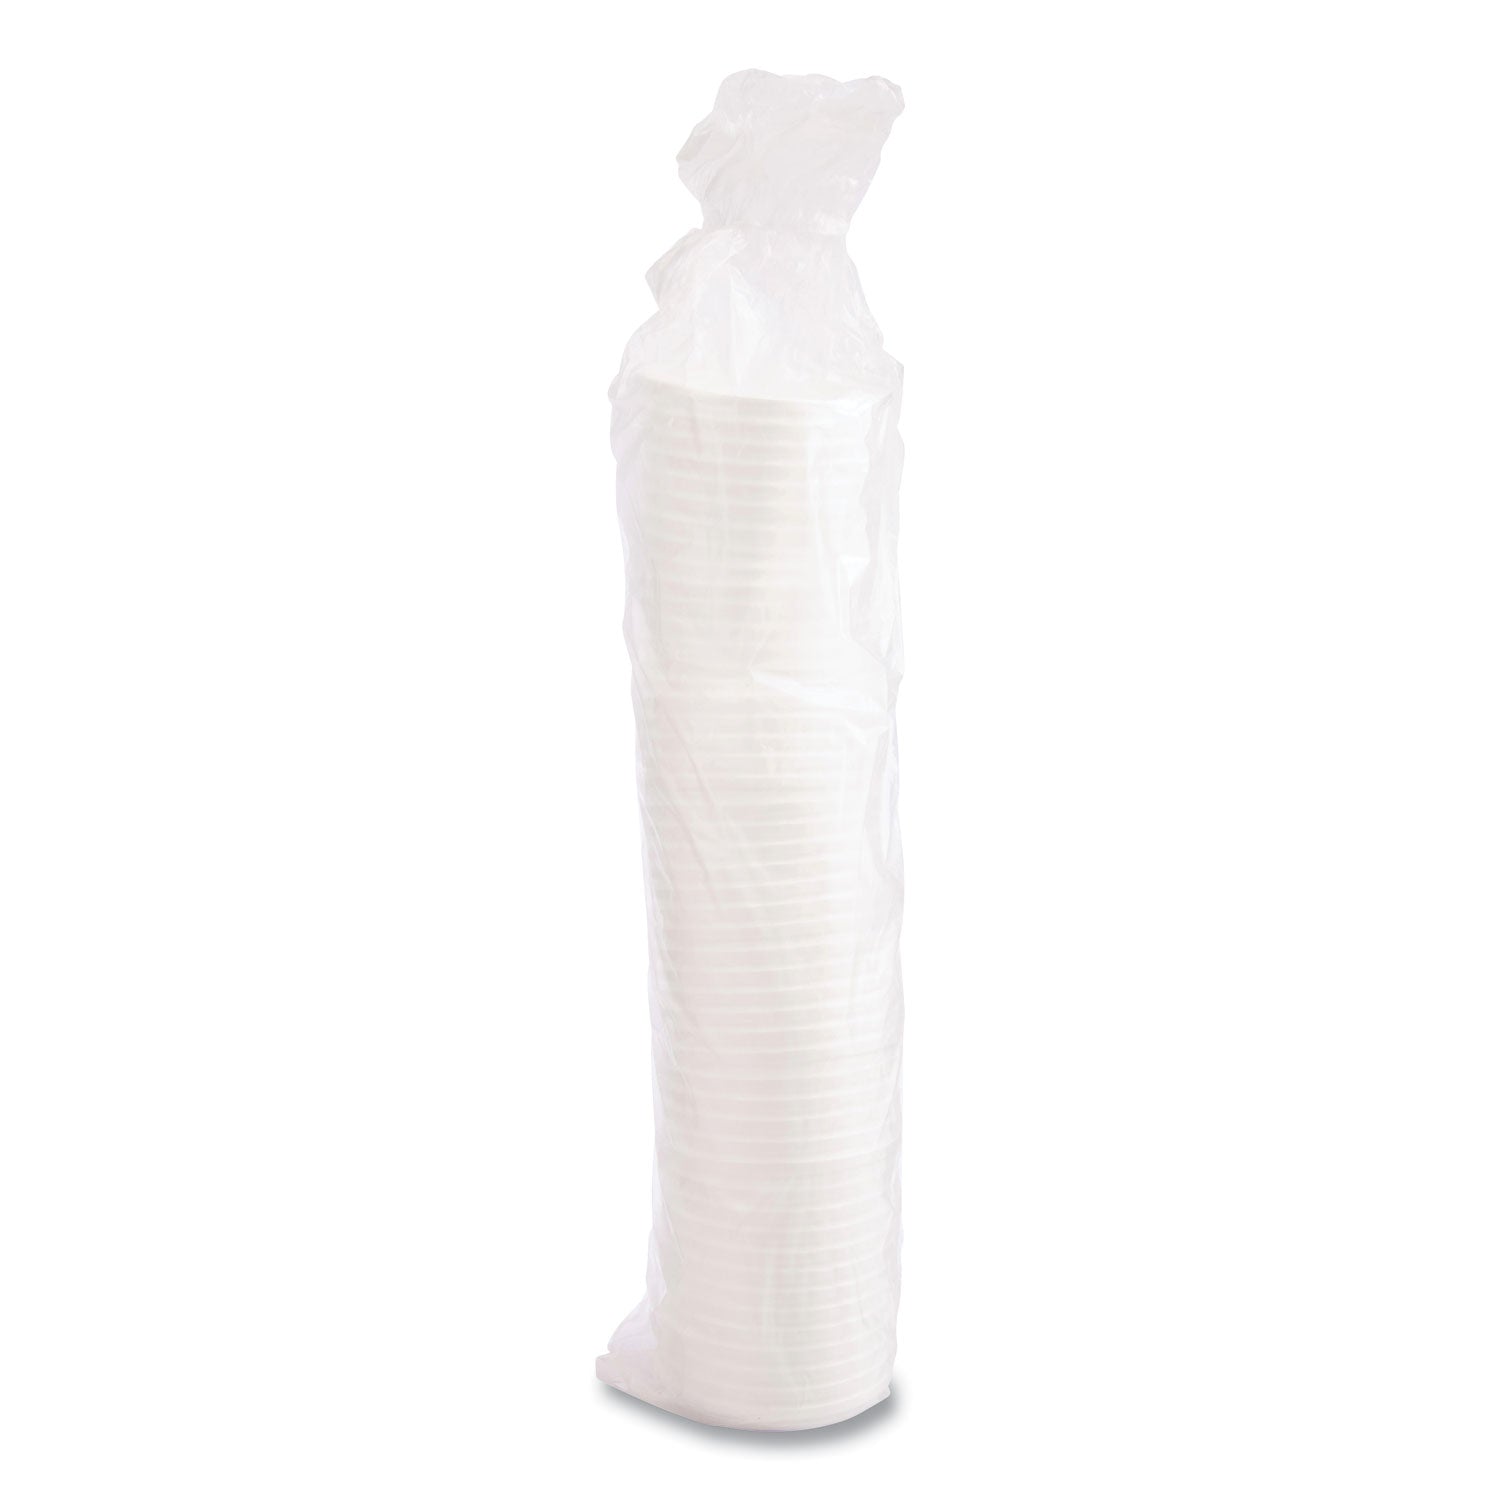 Vented Foam Lids, Fits 6 oz to 32 oz Cups, White, 50 Pack, 10 Packs/Carton - 